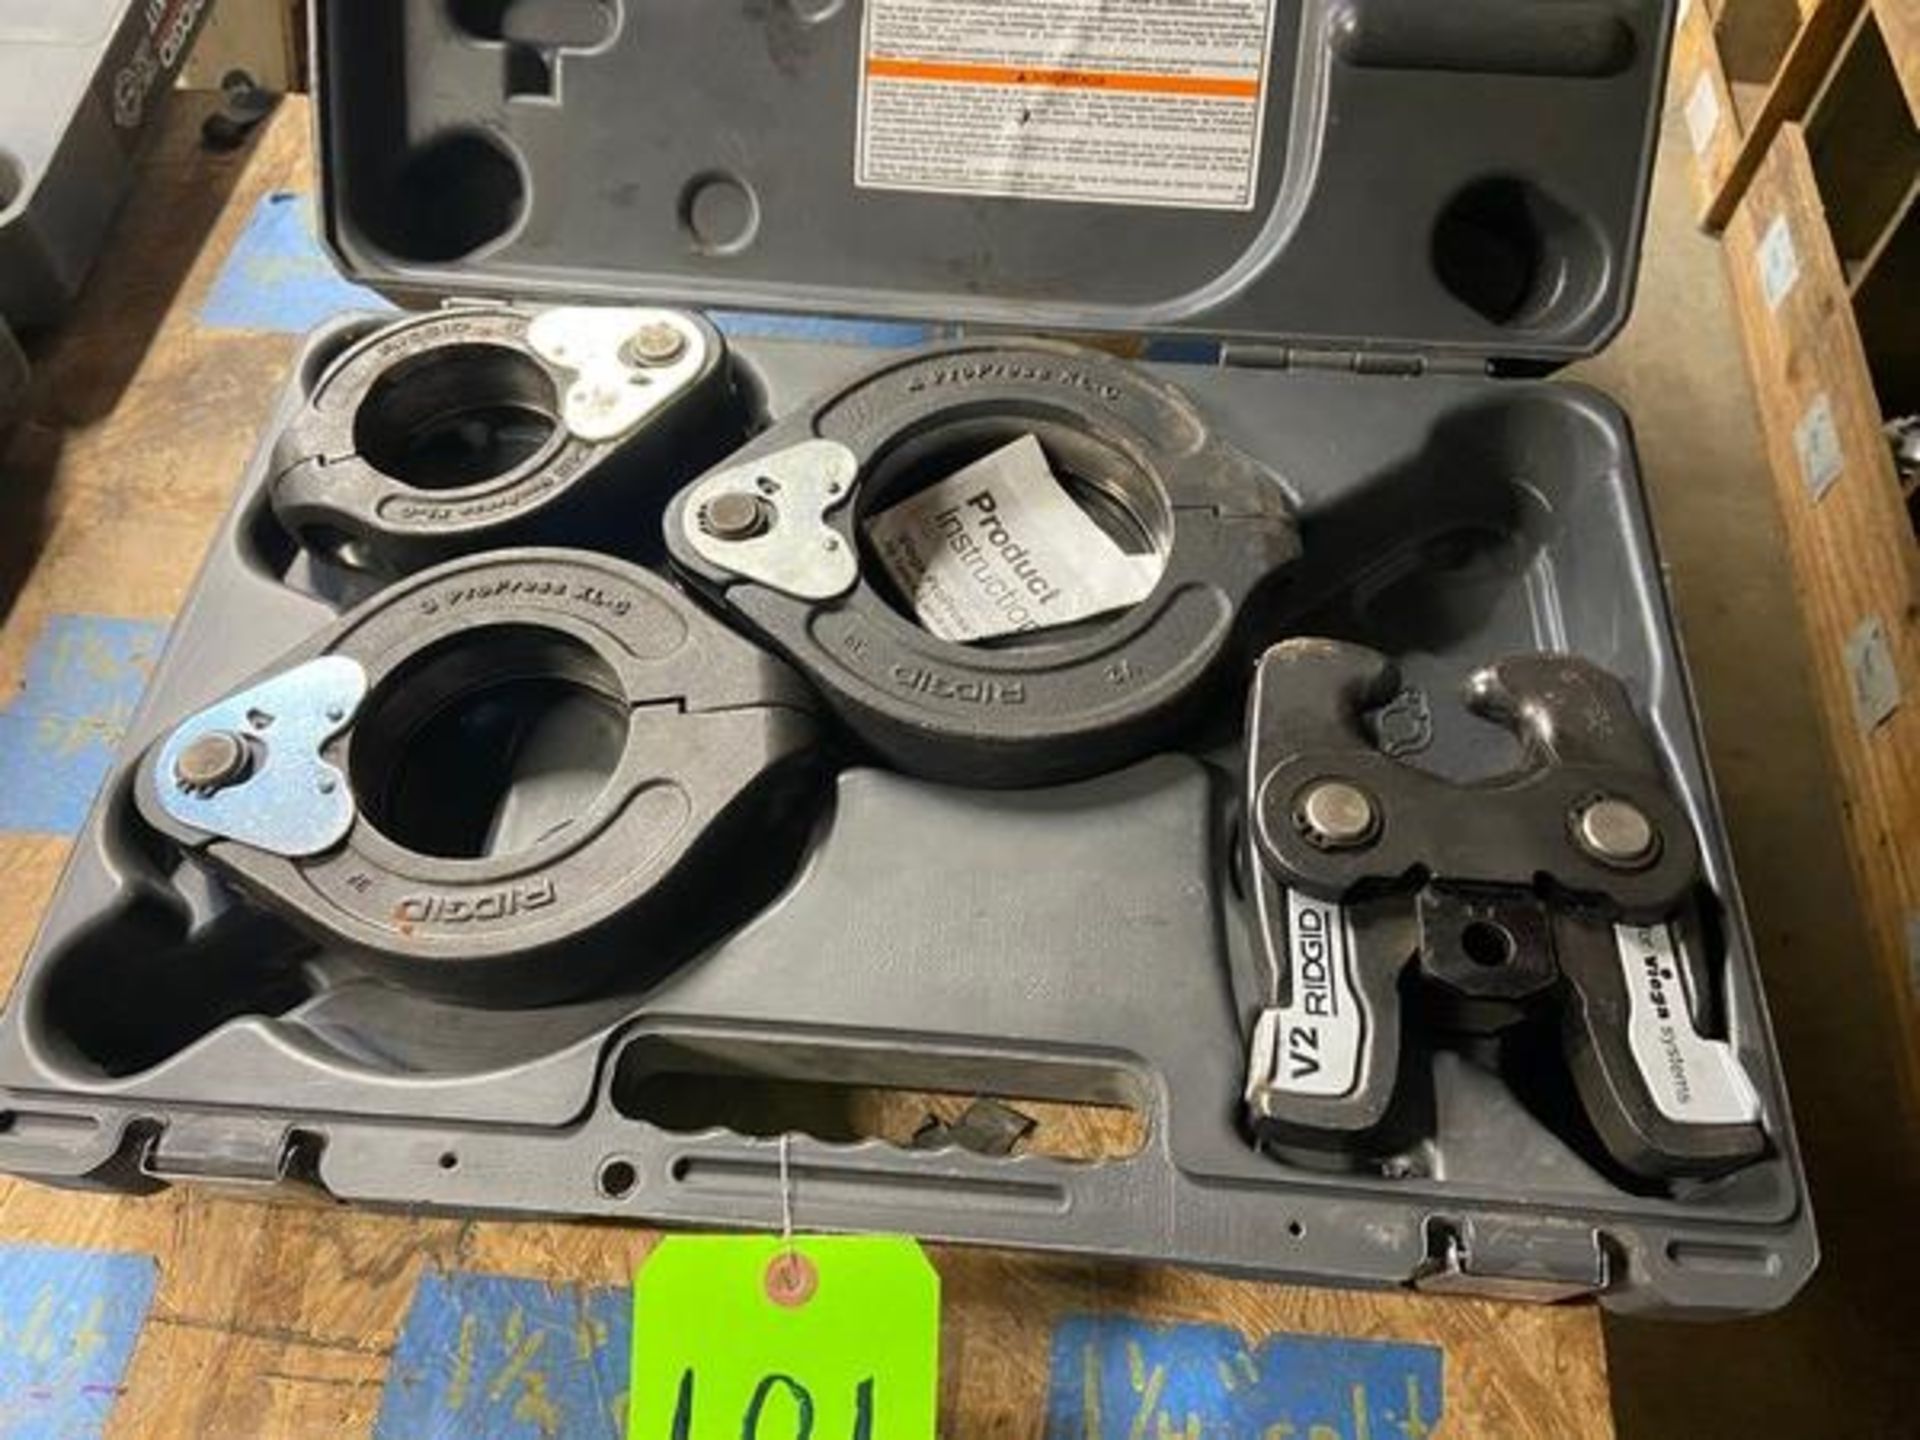 Rigid 2-1/2”- 4” ProPress Jaws, In Hard Case (LOCATED IN MONROEVILLE, PA)(RIGGING, LOADING, & SITE - Image 3 of 6